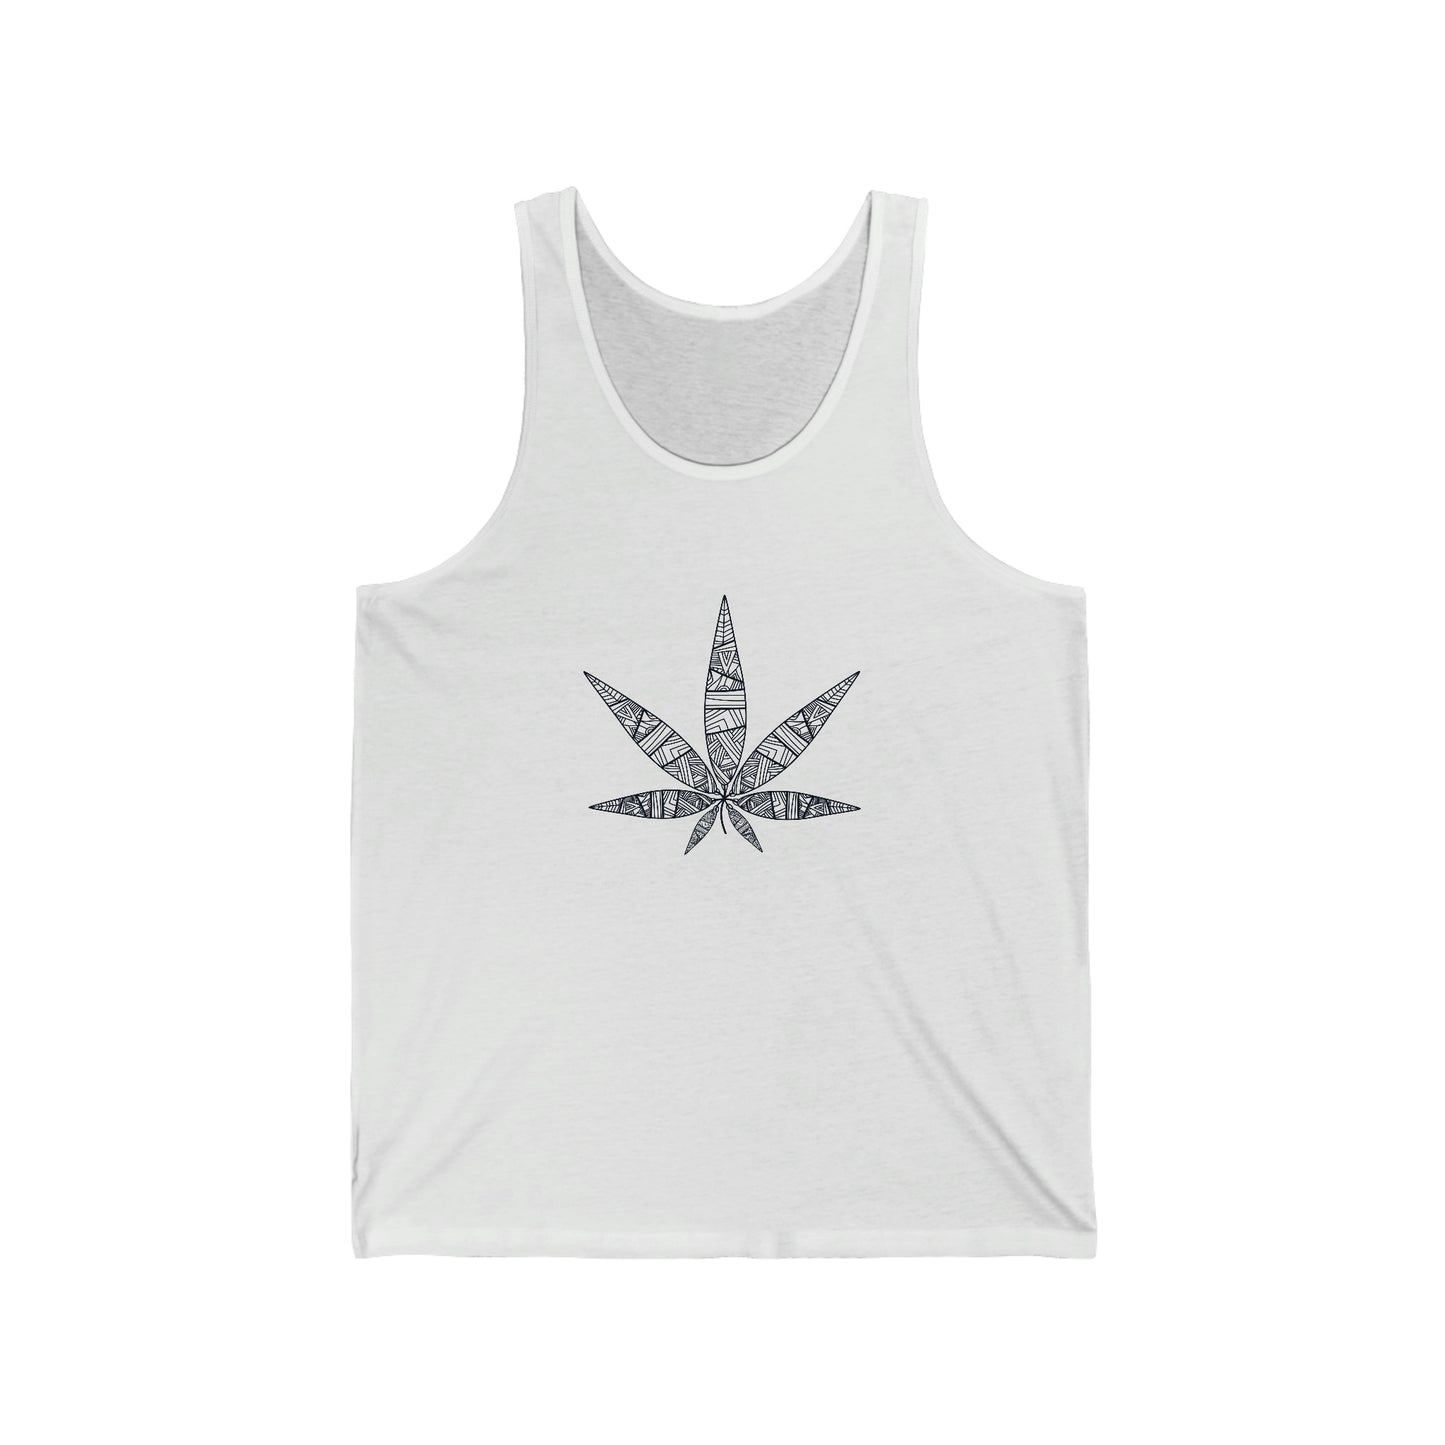 A white Tribal weed Leaf Jersey Tank top